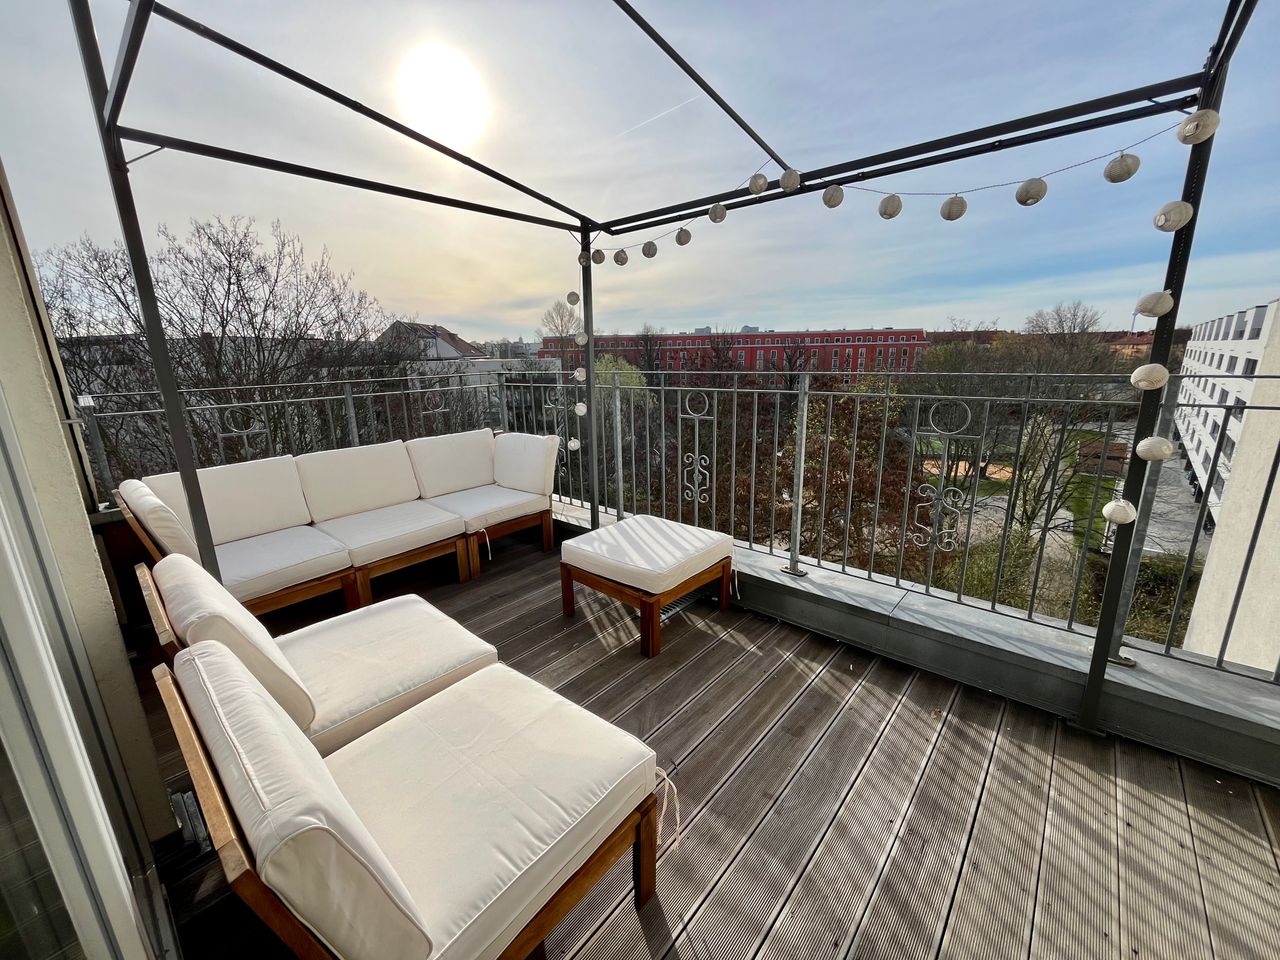 Modern and cozy 4 bed room apartment with rooftop terrace